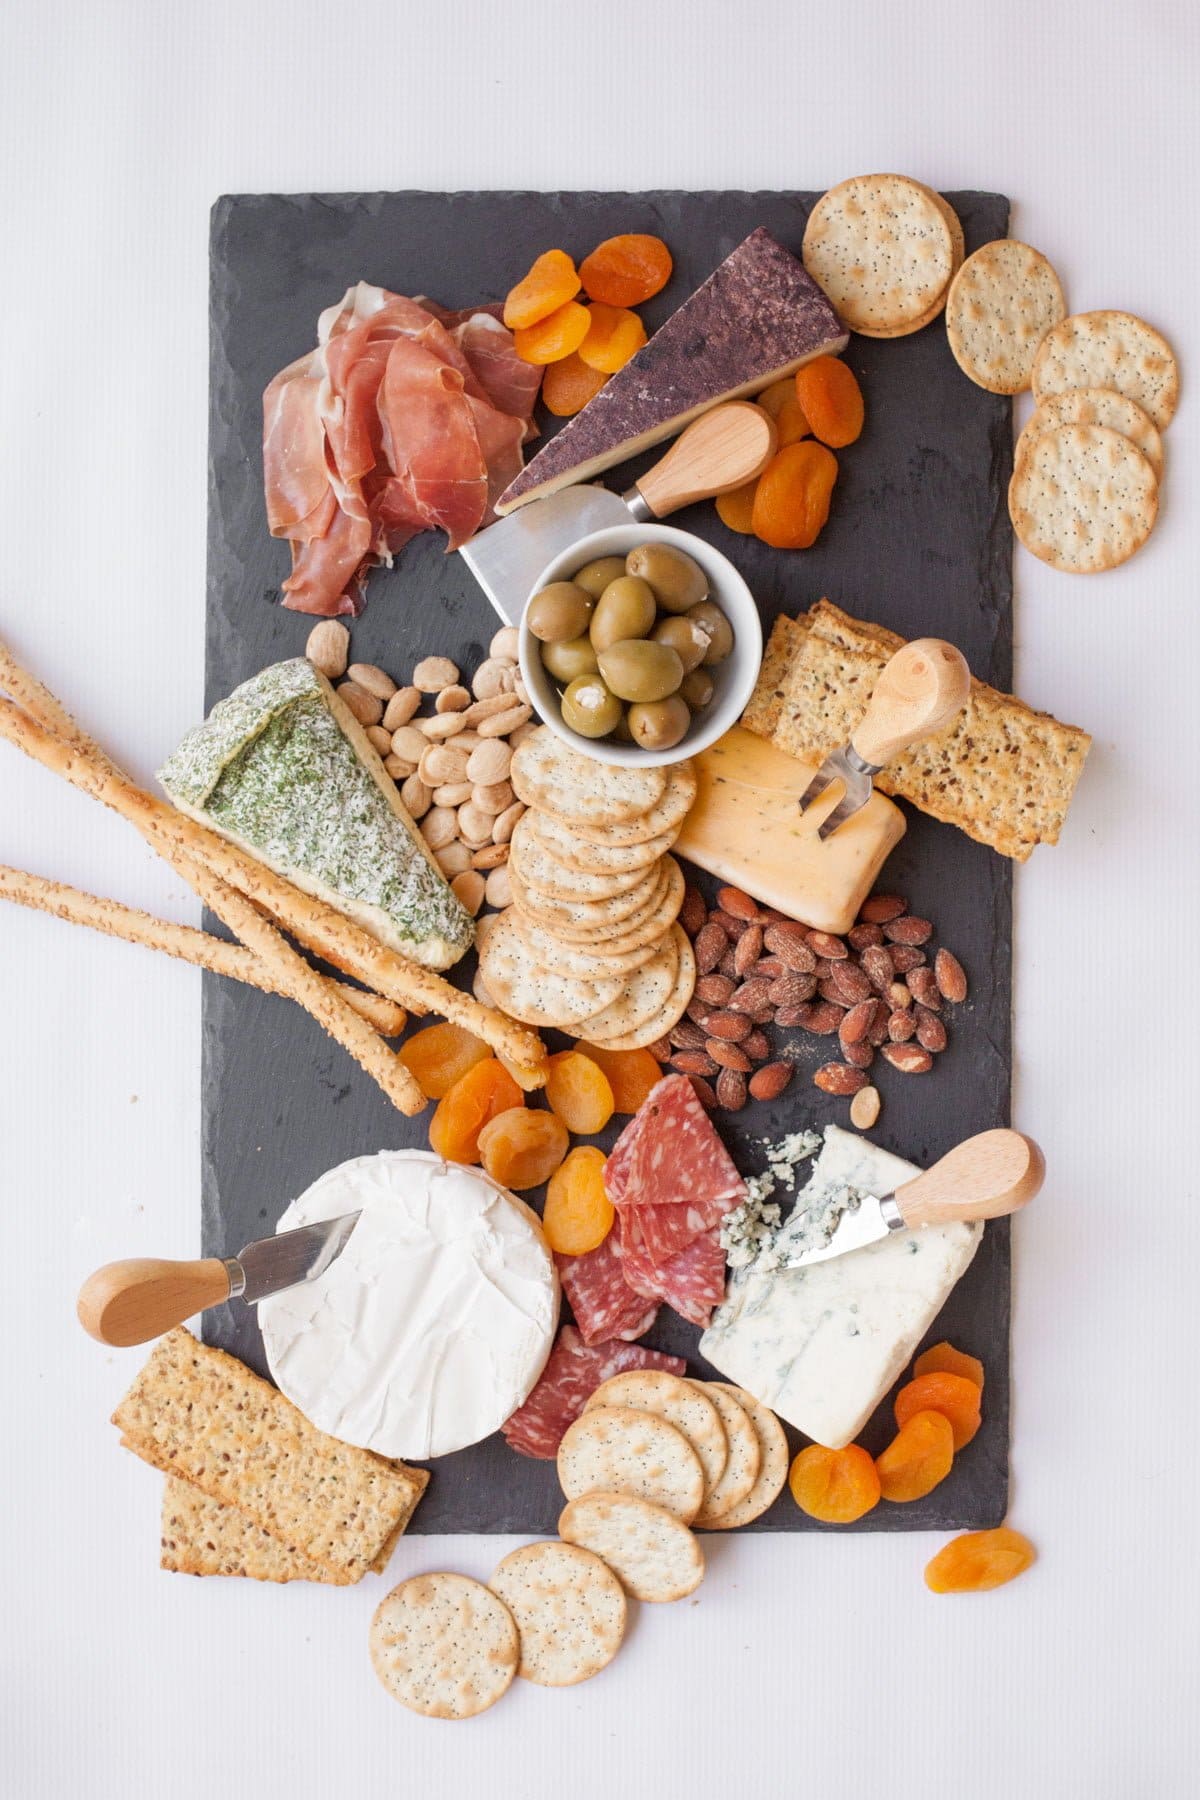 How to Make an Awesome Cheese Board